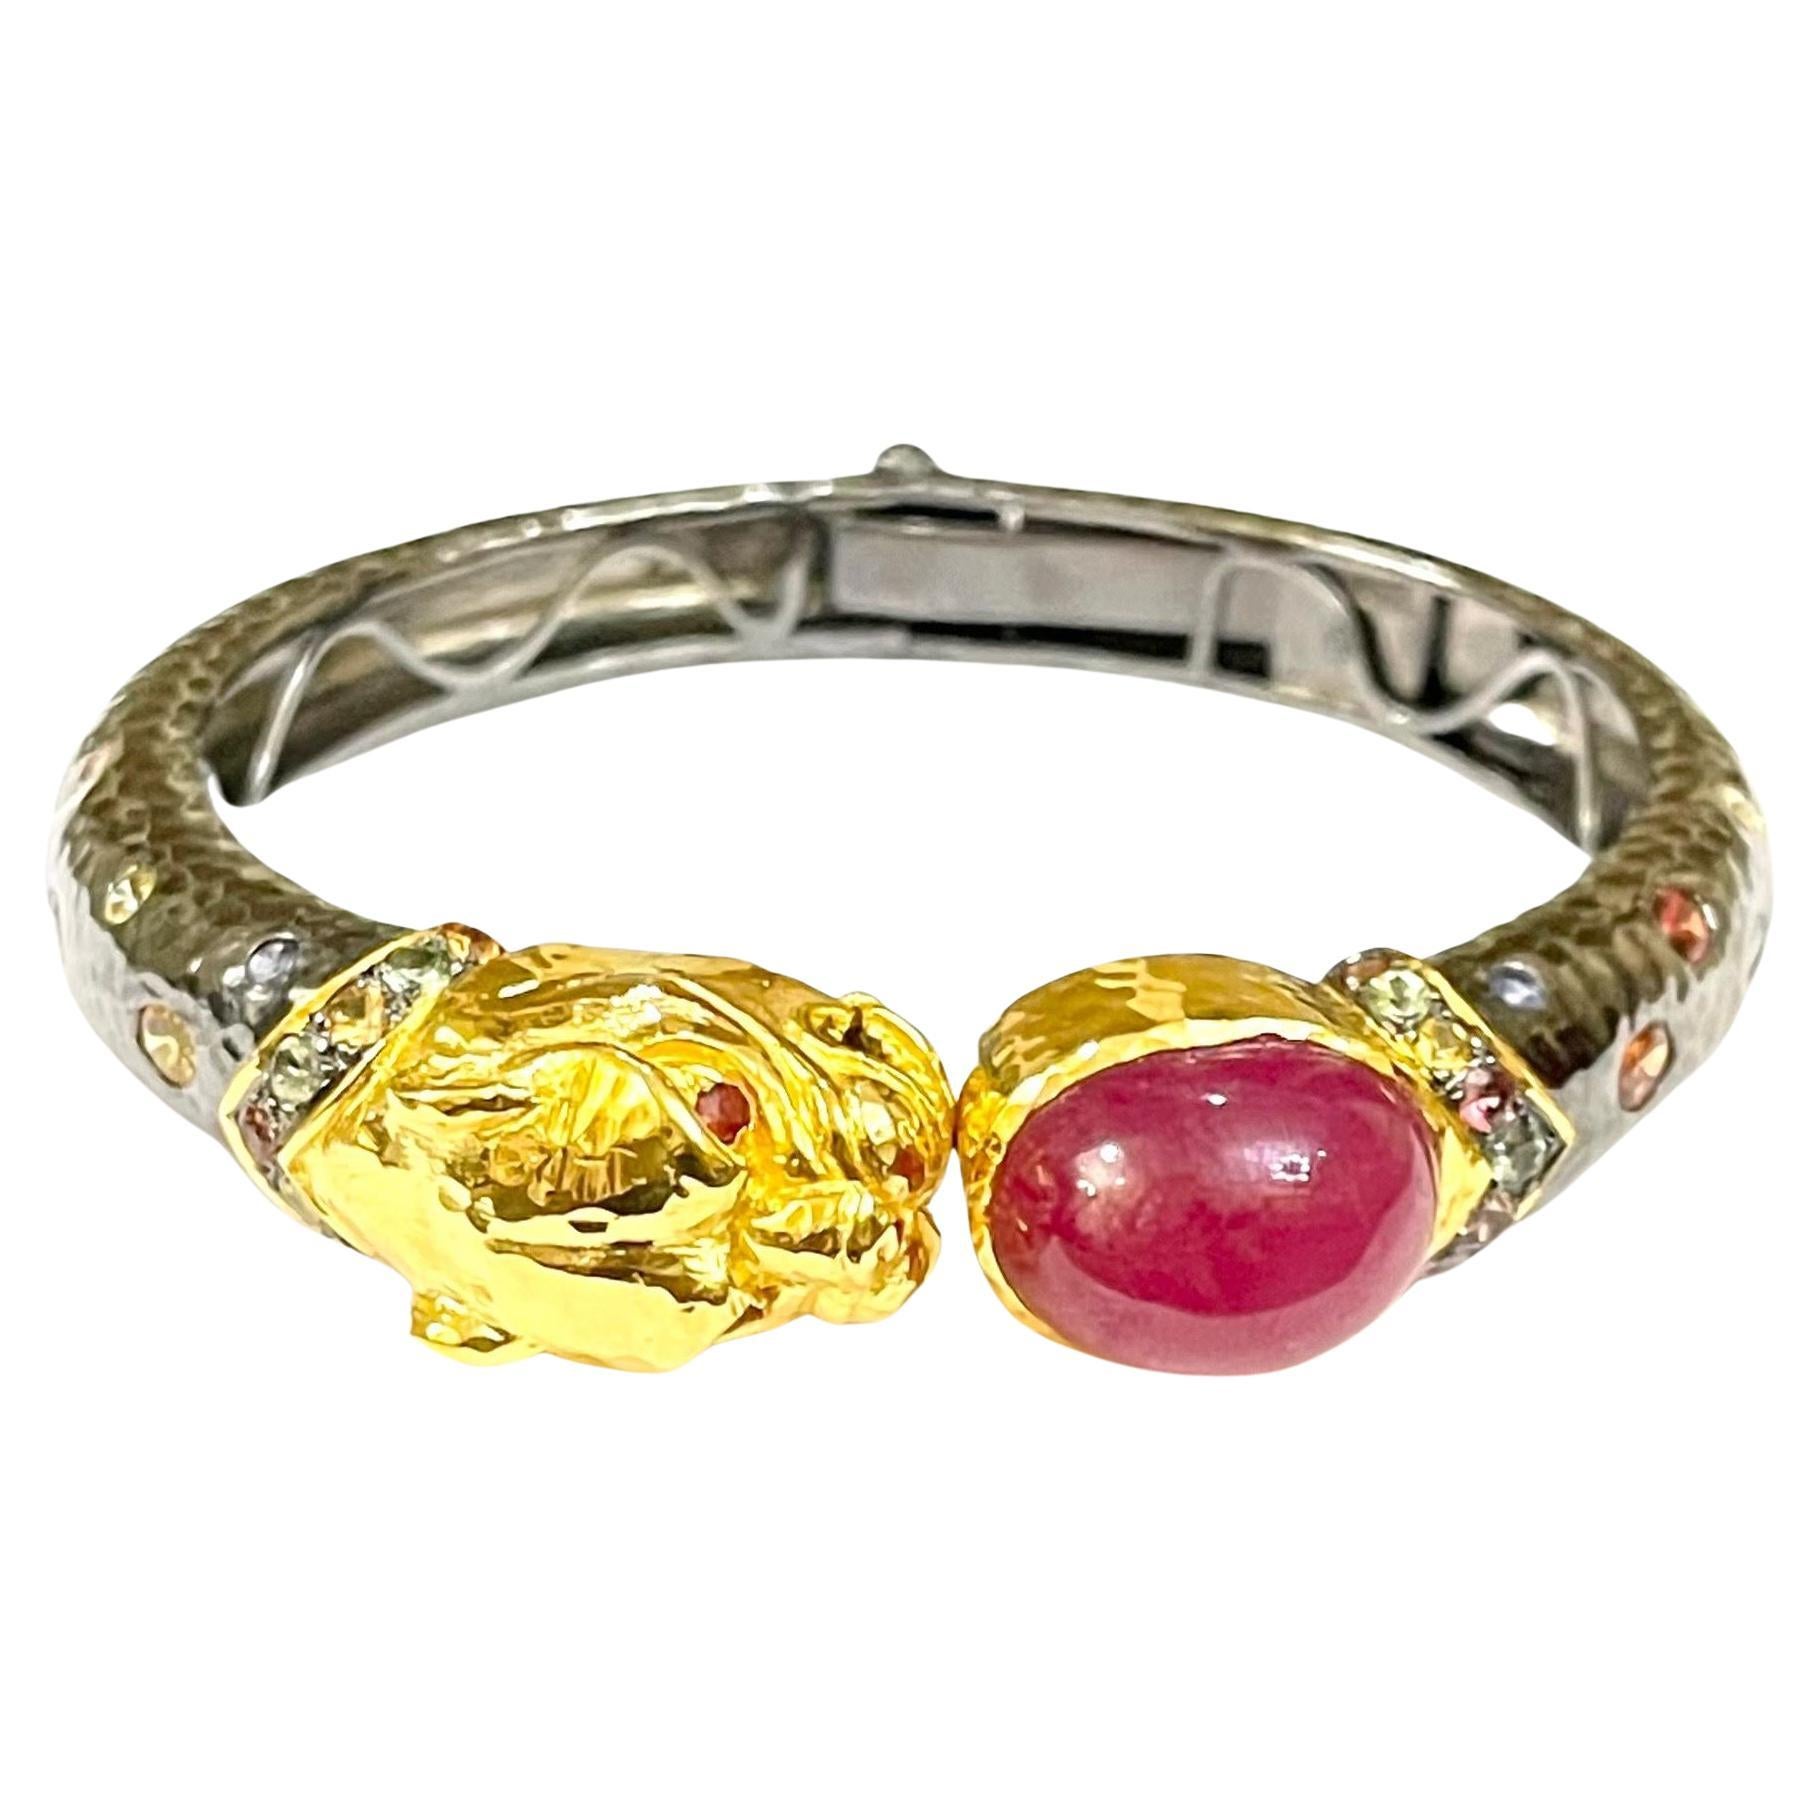 Bochic “Orient” Bangle set 22K Gold & Silver Ruby & Sapphires 
Natural Multi Color Sapphire from Sri Lanka  - 3 carats 
Sapphire colors, Red, Orange and Pink
Red Natural Ruby Cabochon - 21 Carats 
Set in 22K Gold and Silver 950
This Bangle is